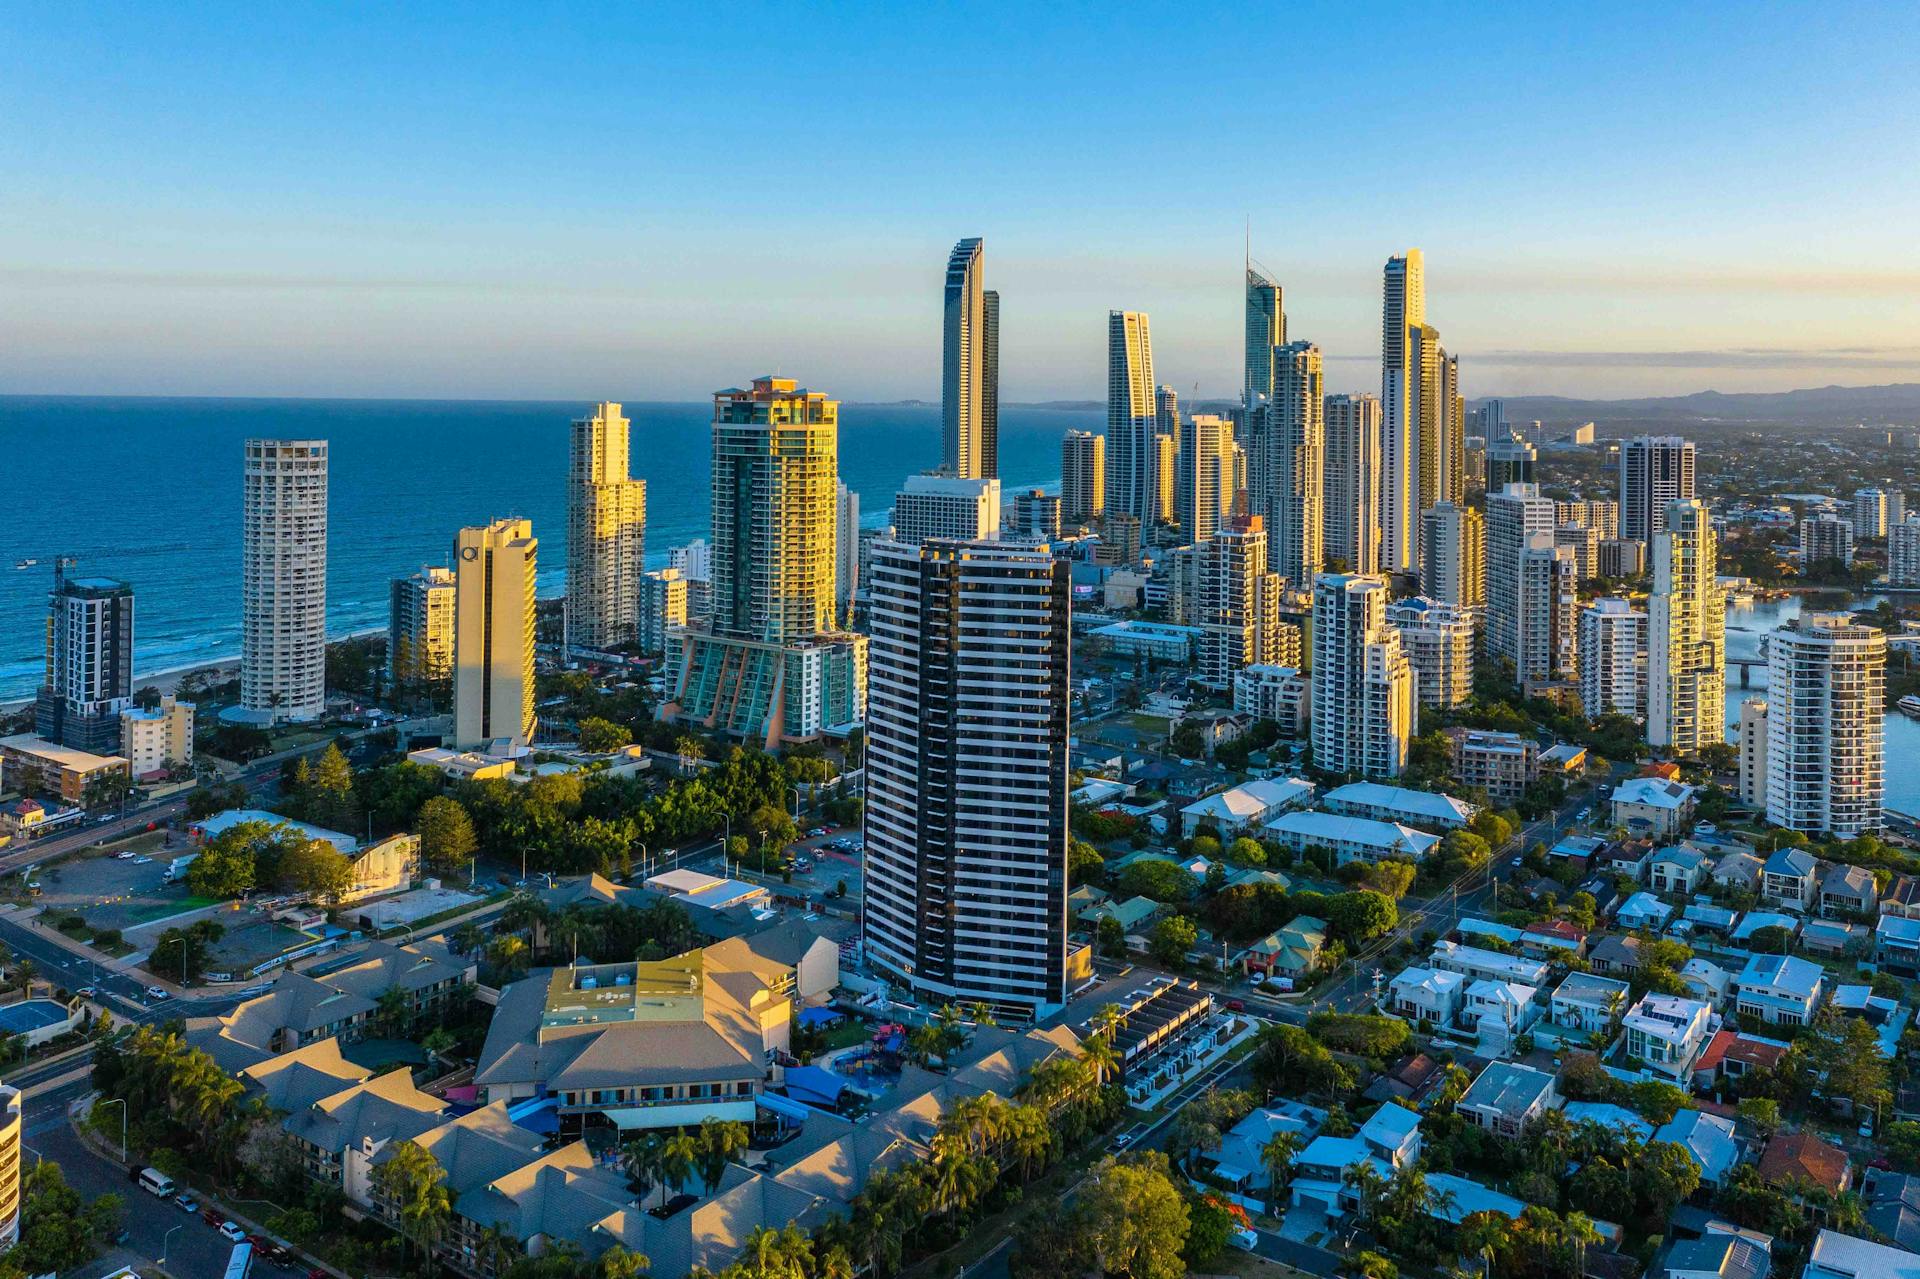 How to Spend a Family Weekend on the Gold Coast